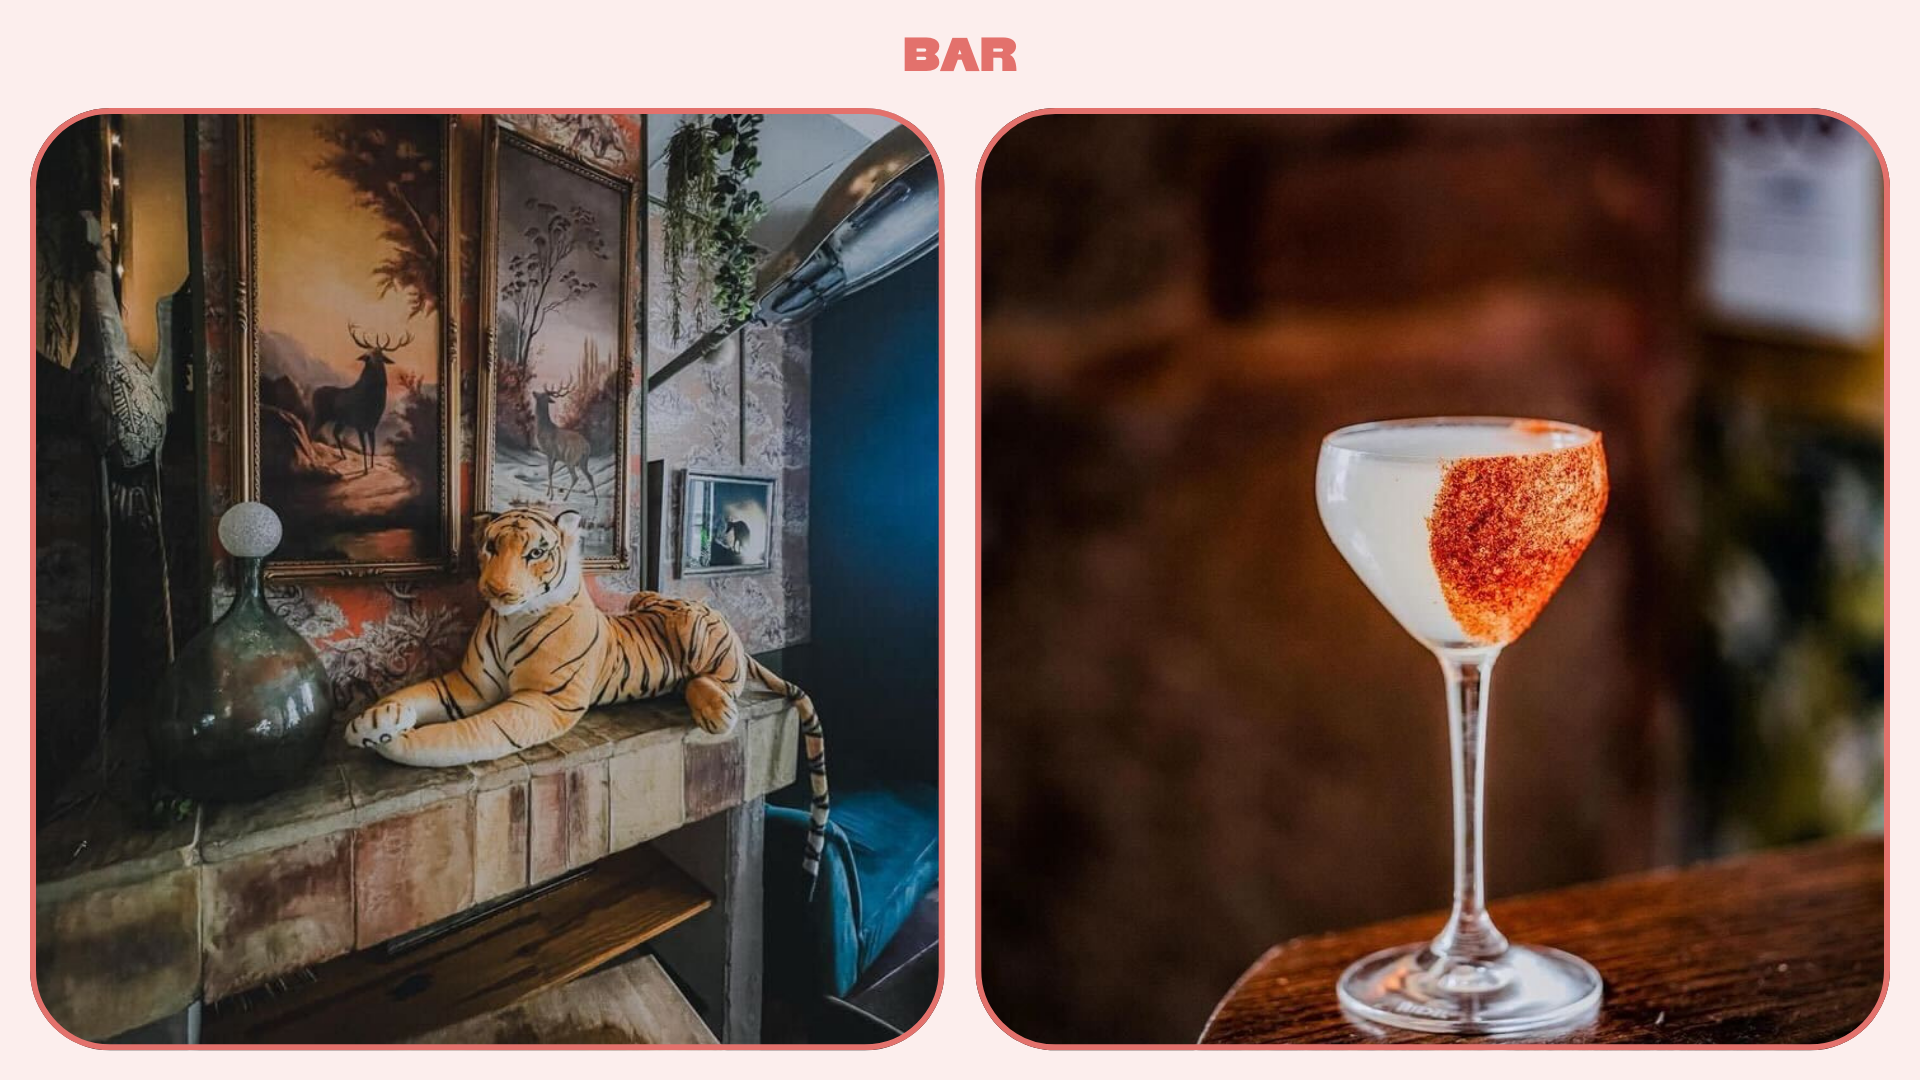 L: Stuffed tiger sits above fireplace. R: Spicy margarita cocktail